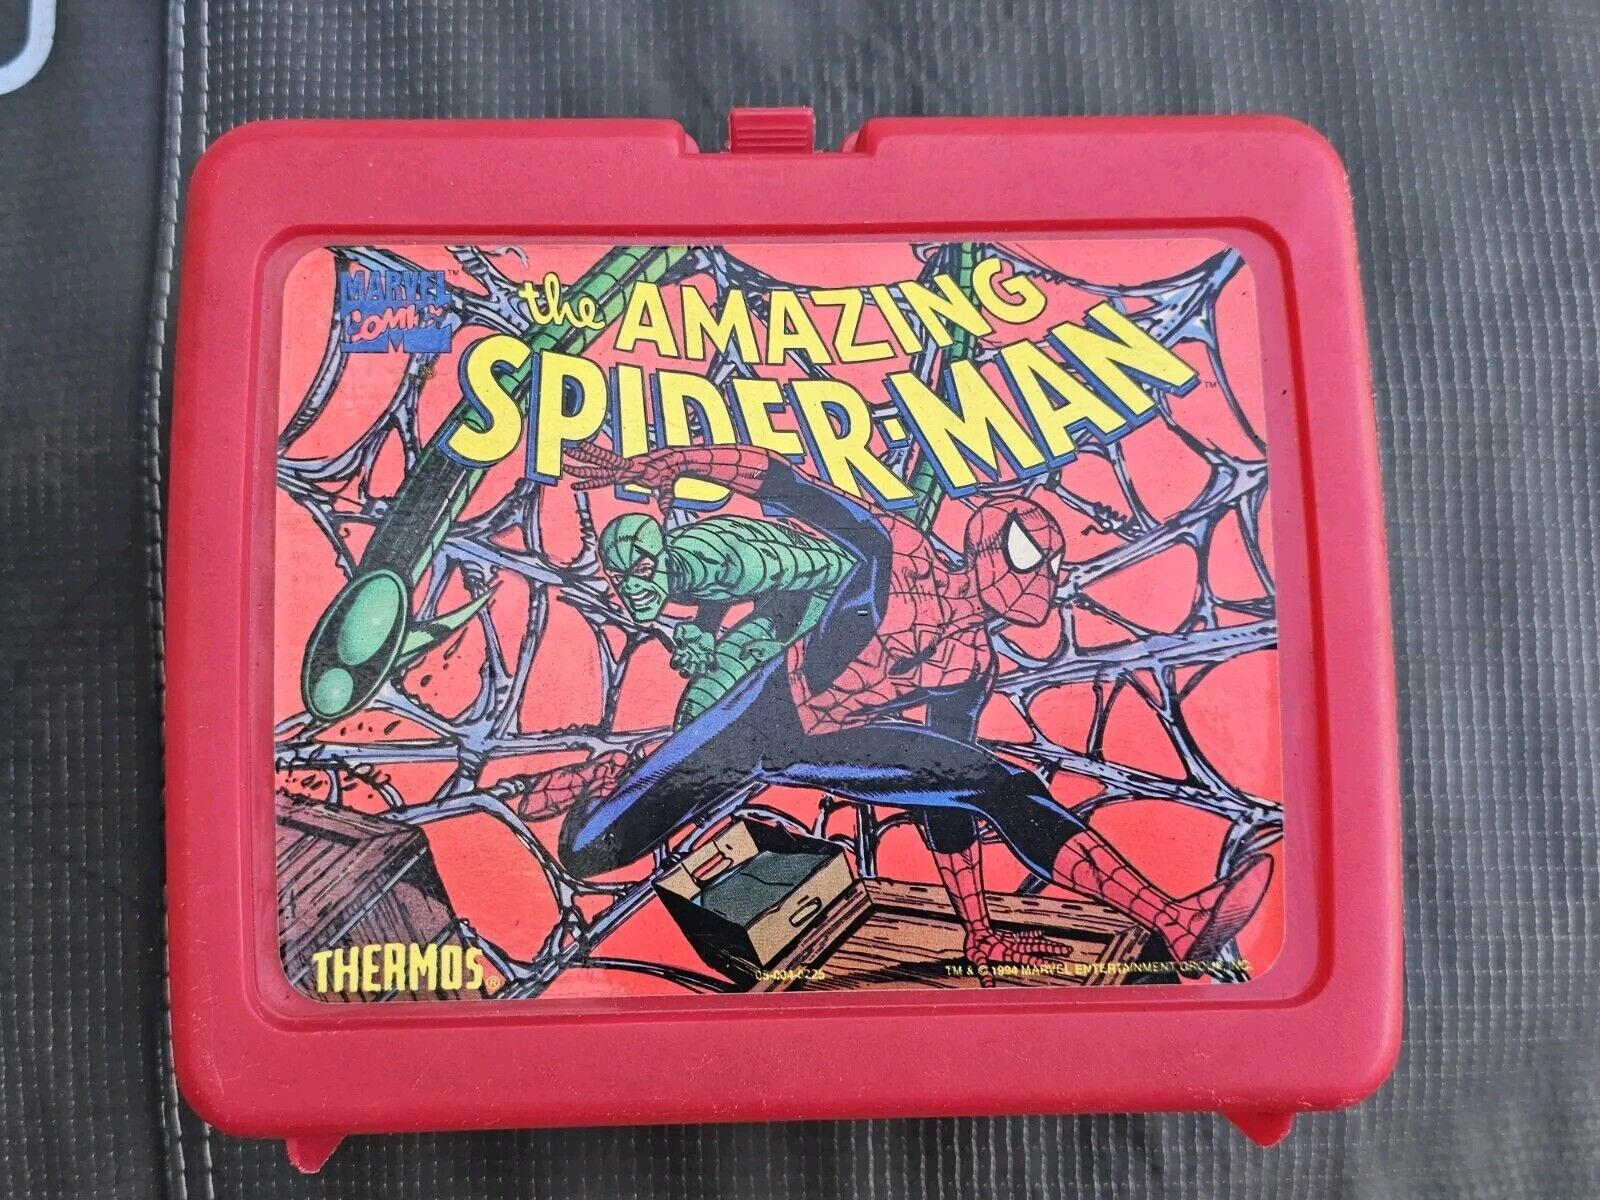 Vintage Thermos The Amazing Spider-Man w/ Scorpion Red Lunchbox Made in USA 1994